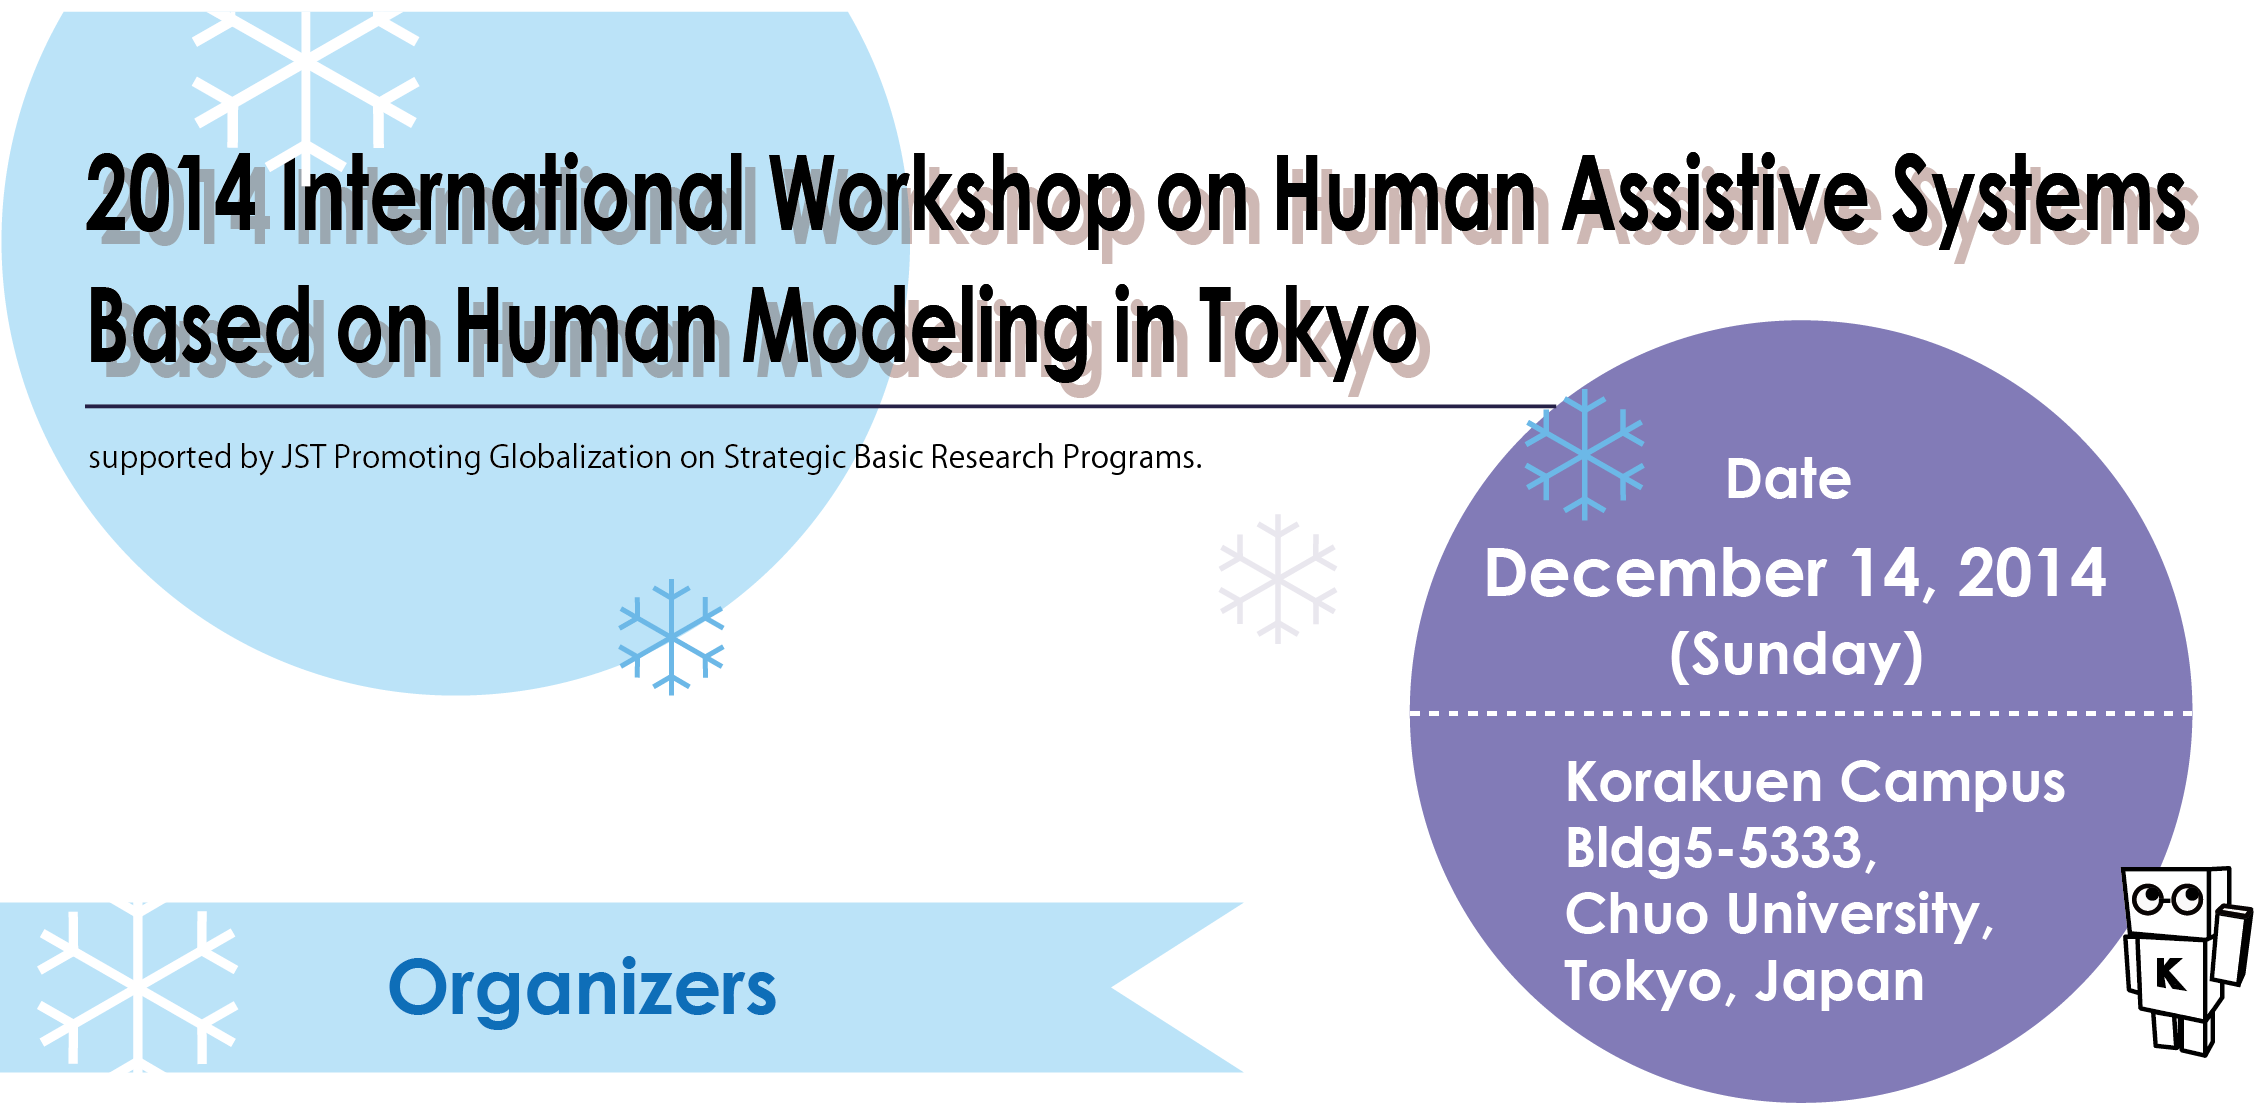 2014 International Workshop on Human Assistive Systems Based on Human Modeling in Tokyo